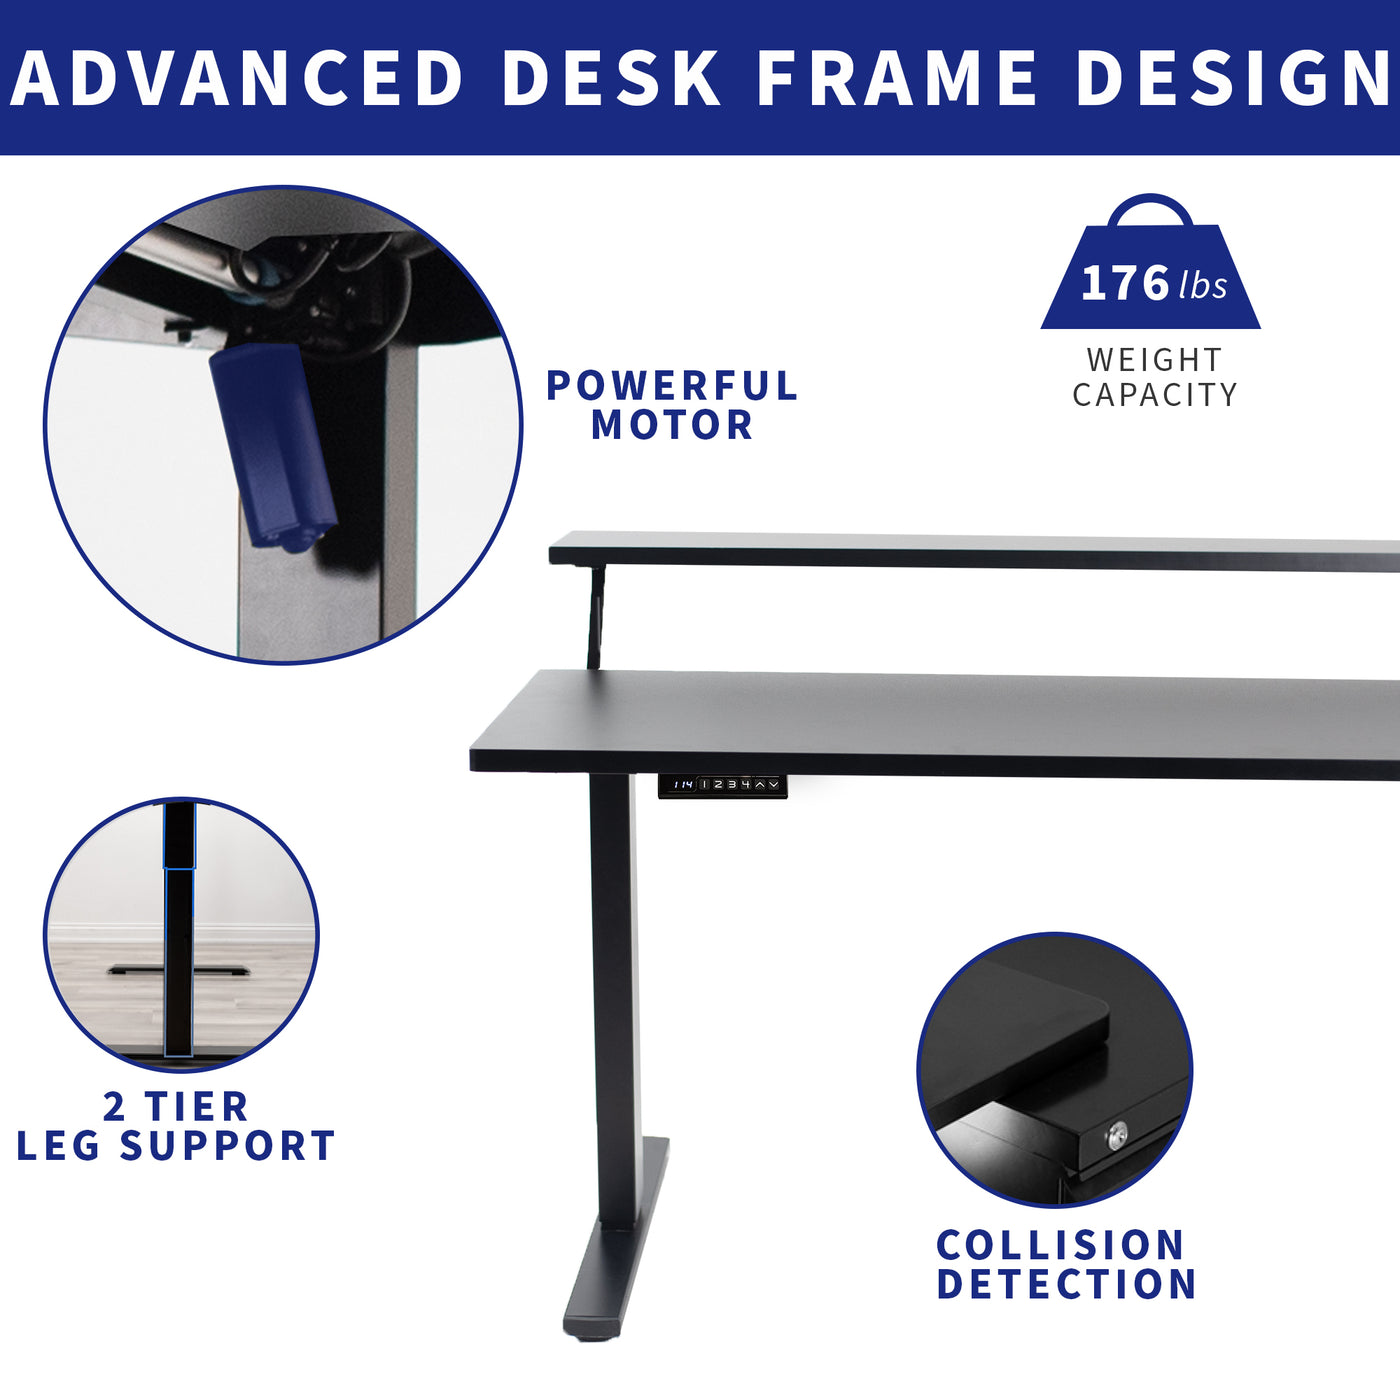 Sturdy desk frame design with powerful motor, collision detection, hefty weight capacity, and two-tier legs.